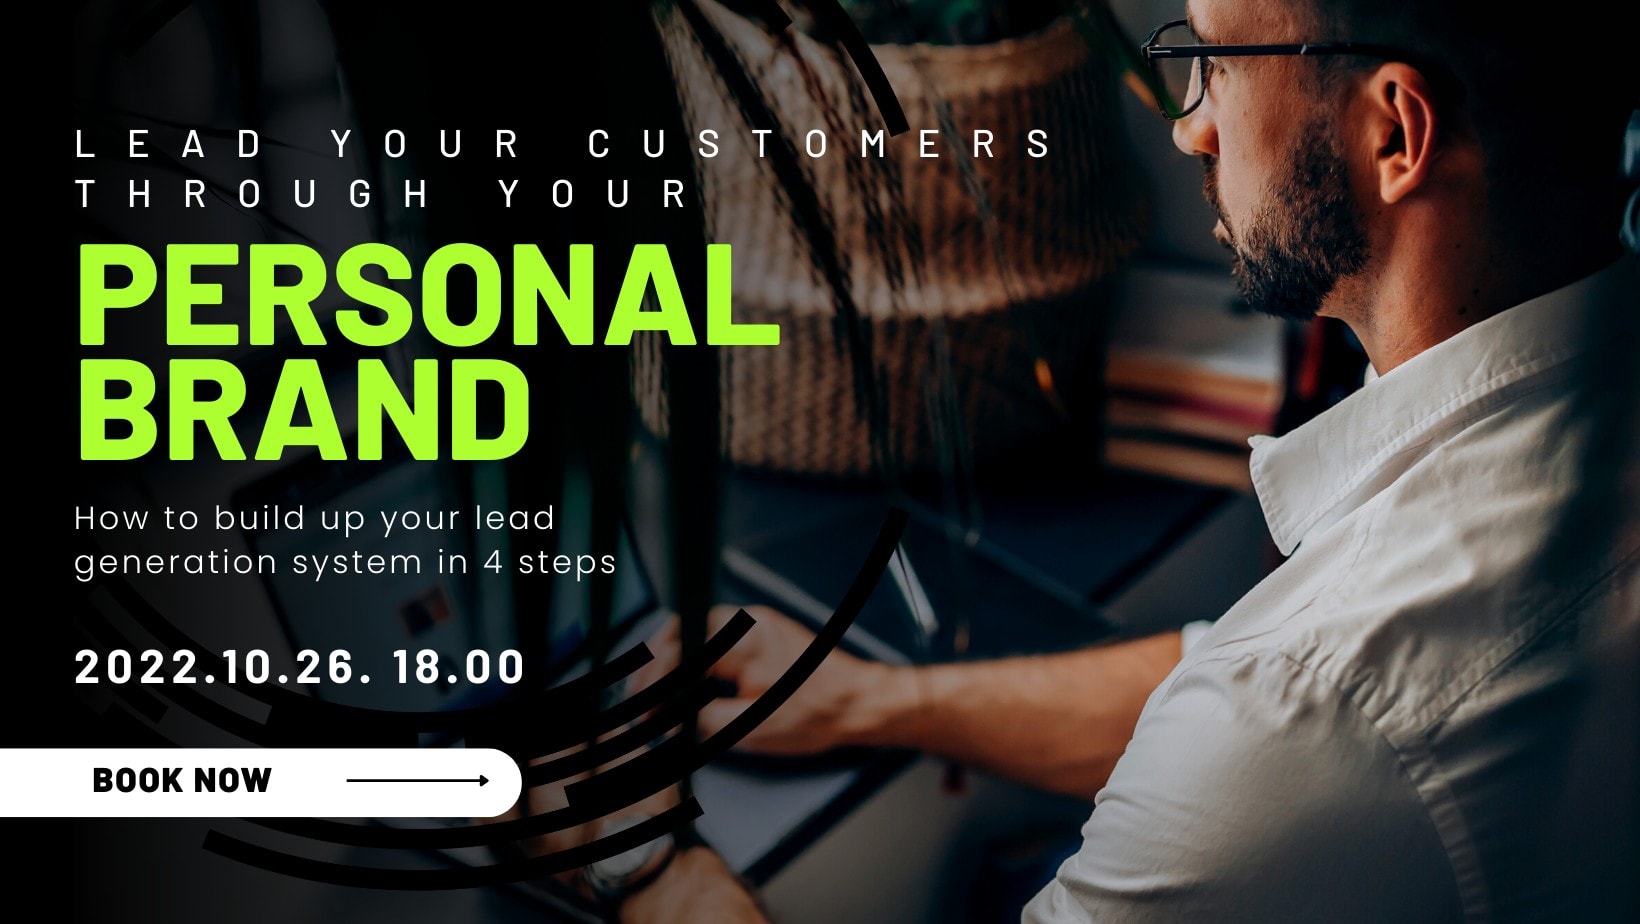 LEAD YOUR CUSTOMERS THROUGH YOUR PERSONAL BRAND ? 26 OCT